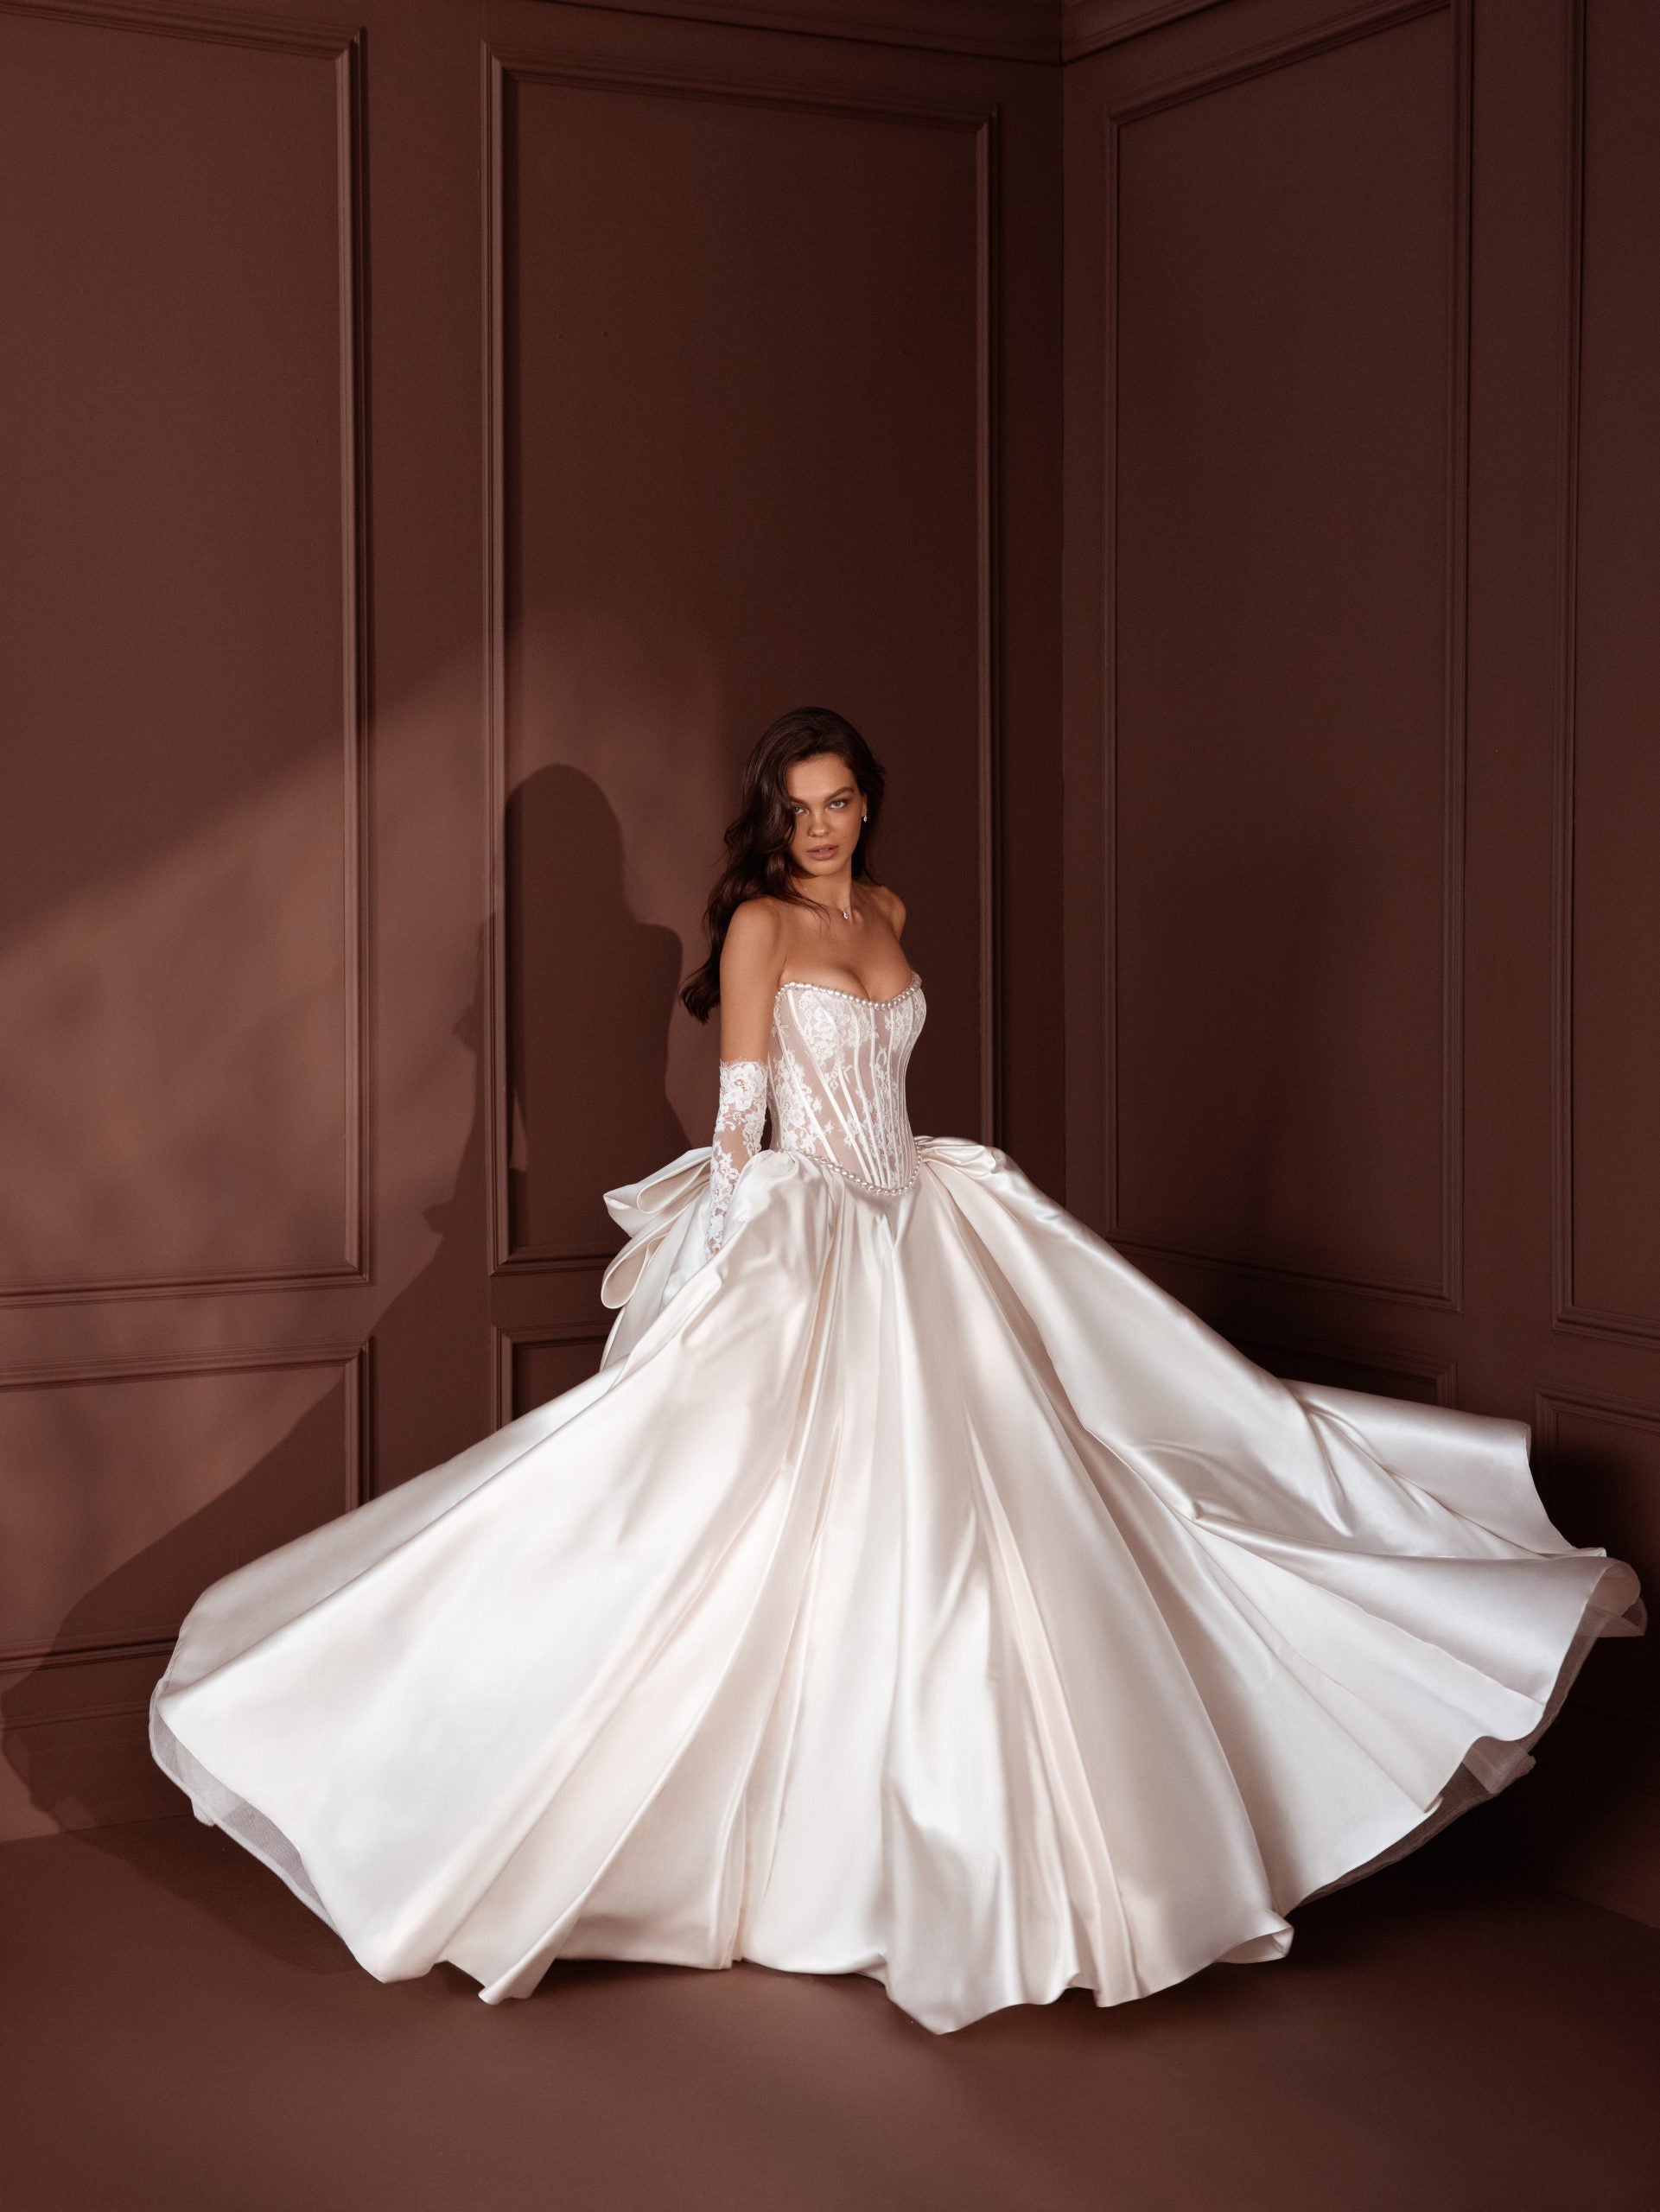 Strapless ballgown with sheer Alençon lace bodice by Pnina Tornai - Image 1